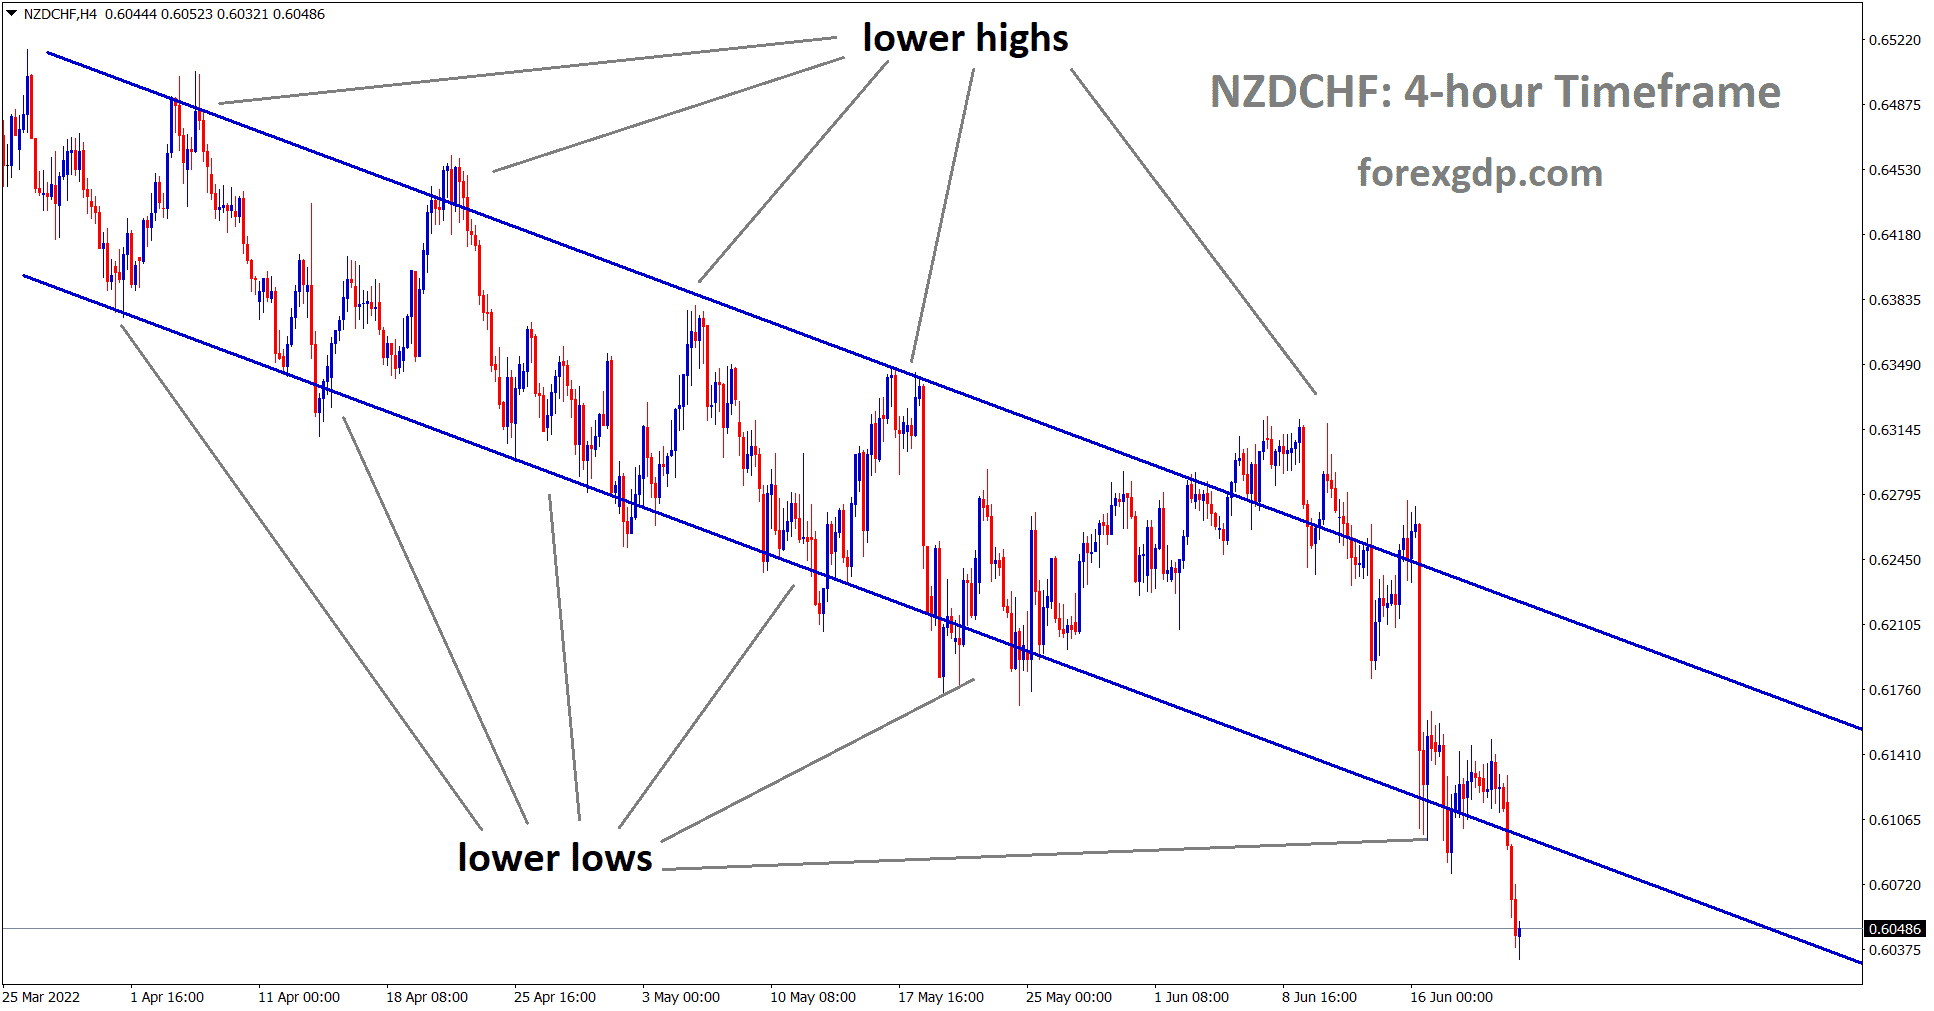 NZDCHF moving in descending channel and the market has reached lower low area of the channel.